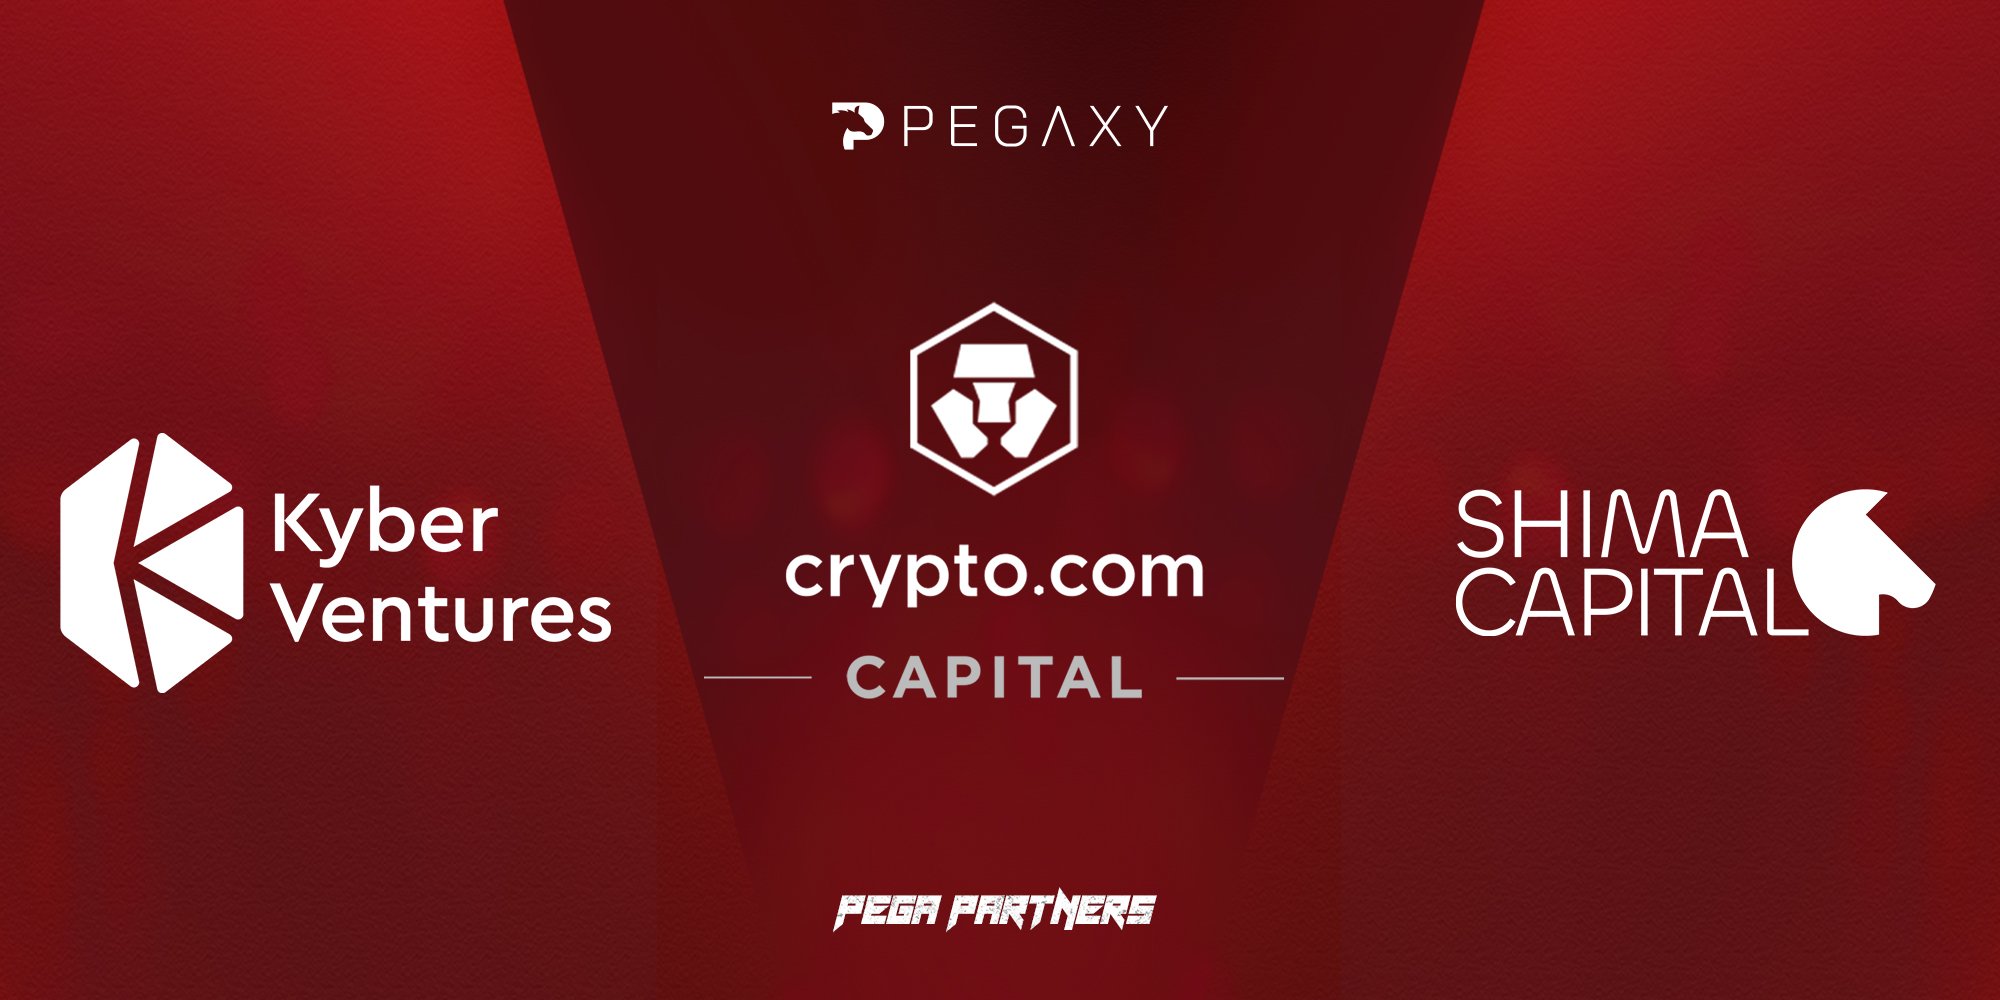 Pegaxy Raises .5M in Just Weeks With Industry Giants | P2E News